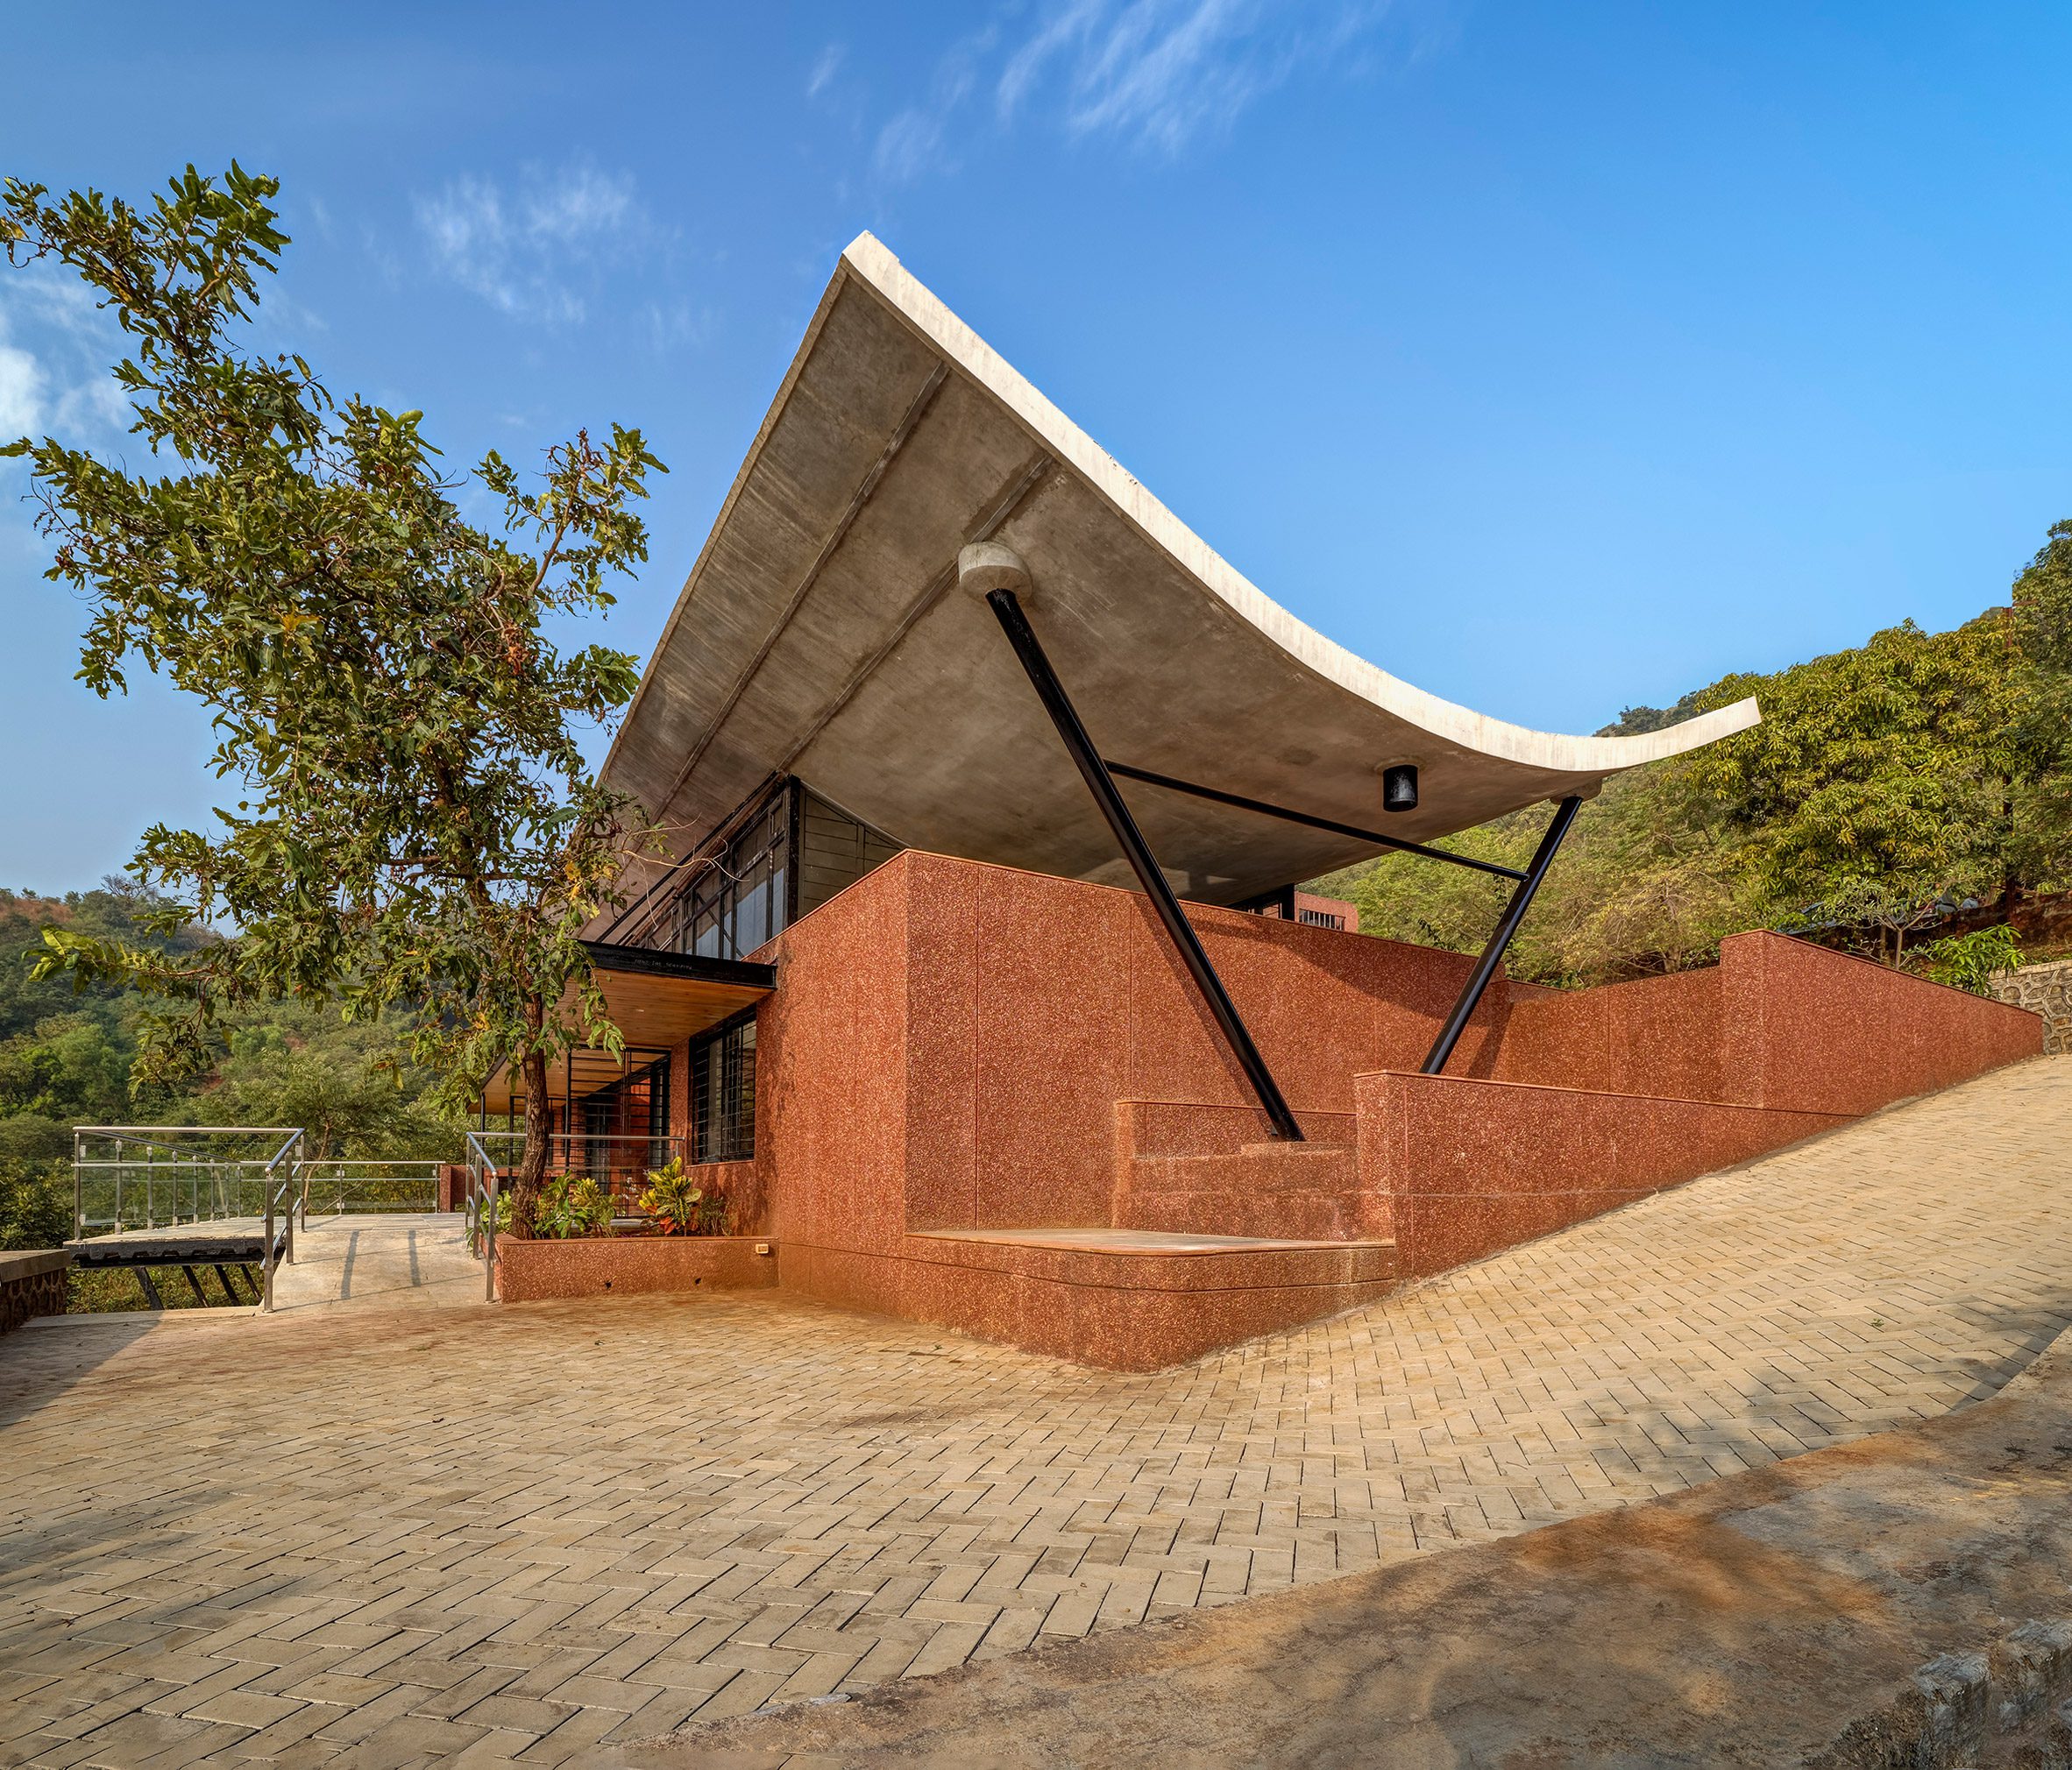 Red brick exteriof of The Cove House in the Western Ghats mountains